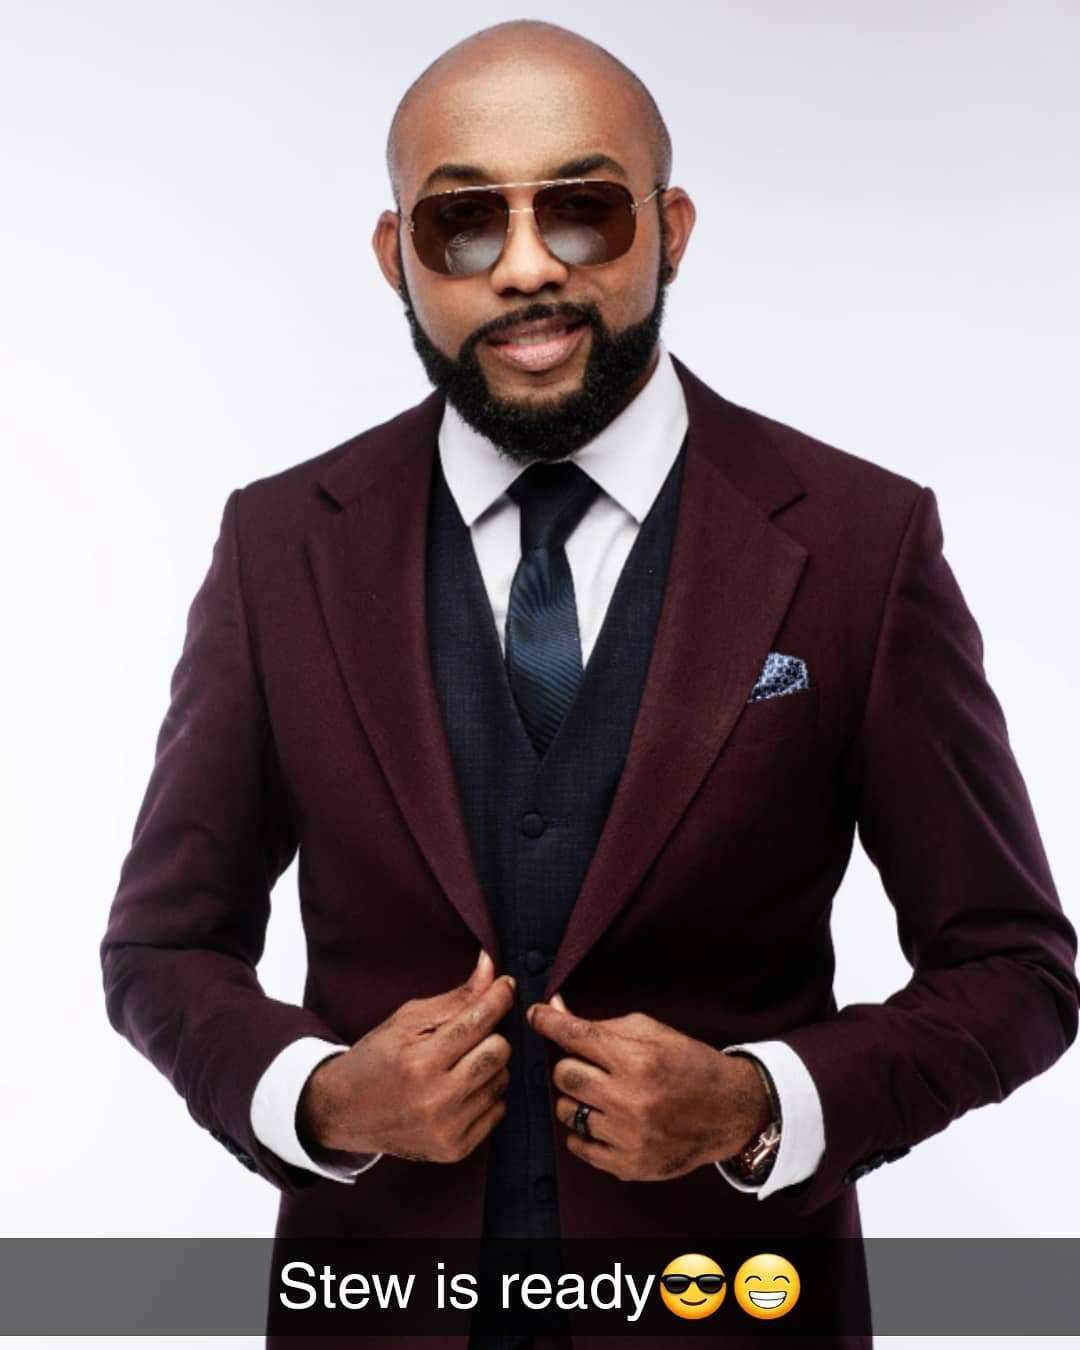 Banky W's SUV car finally auctioned